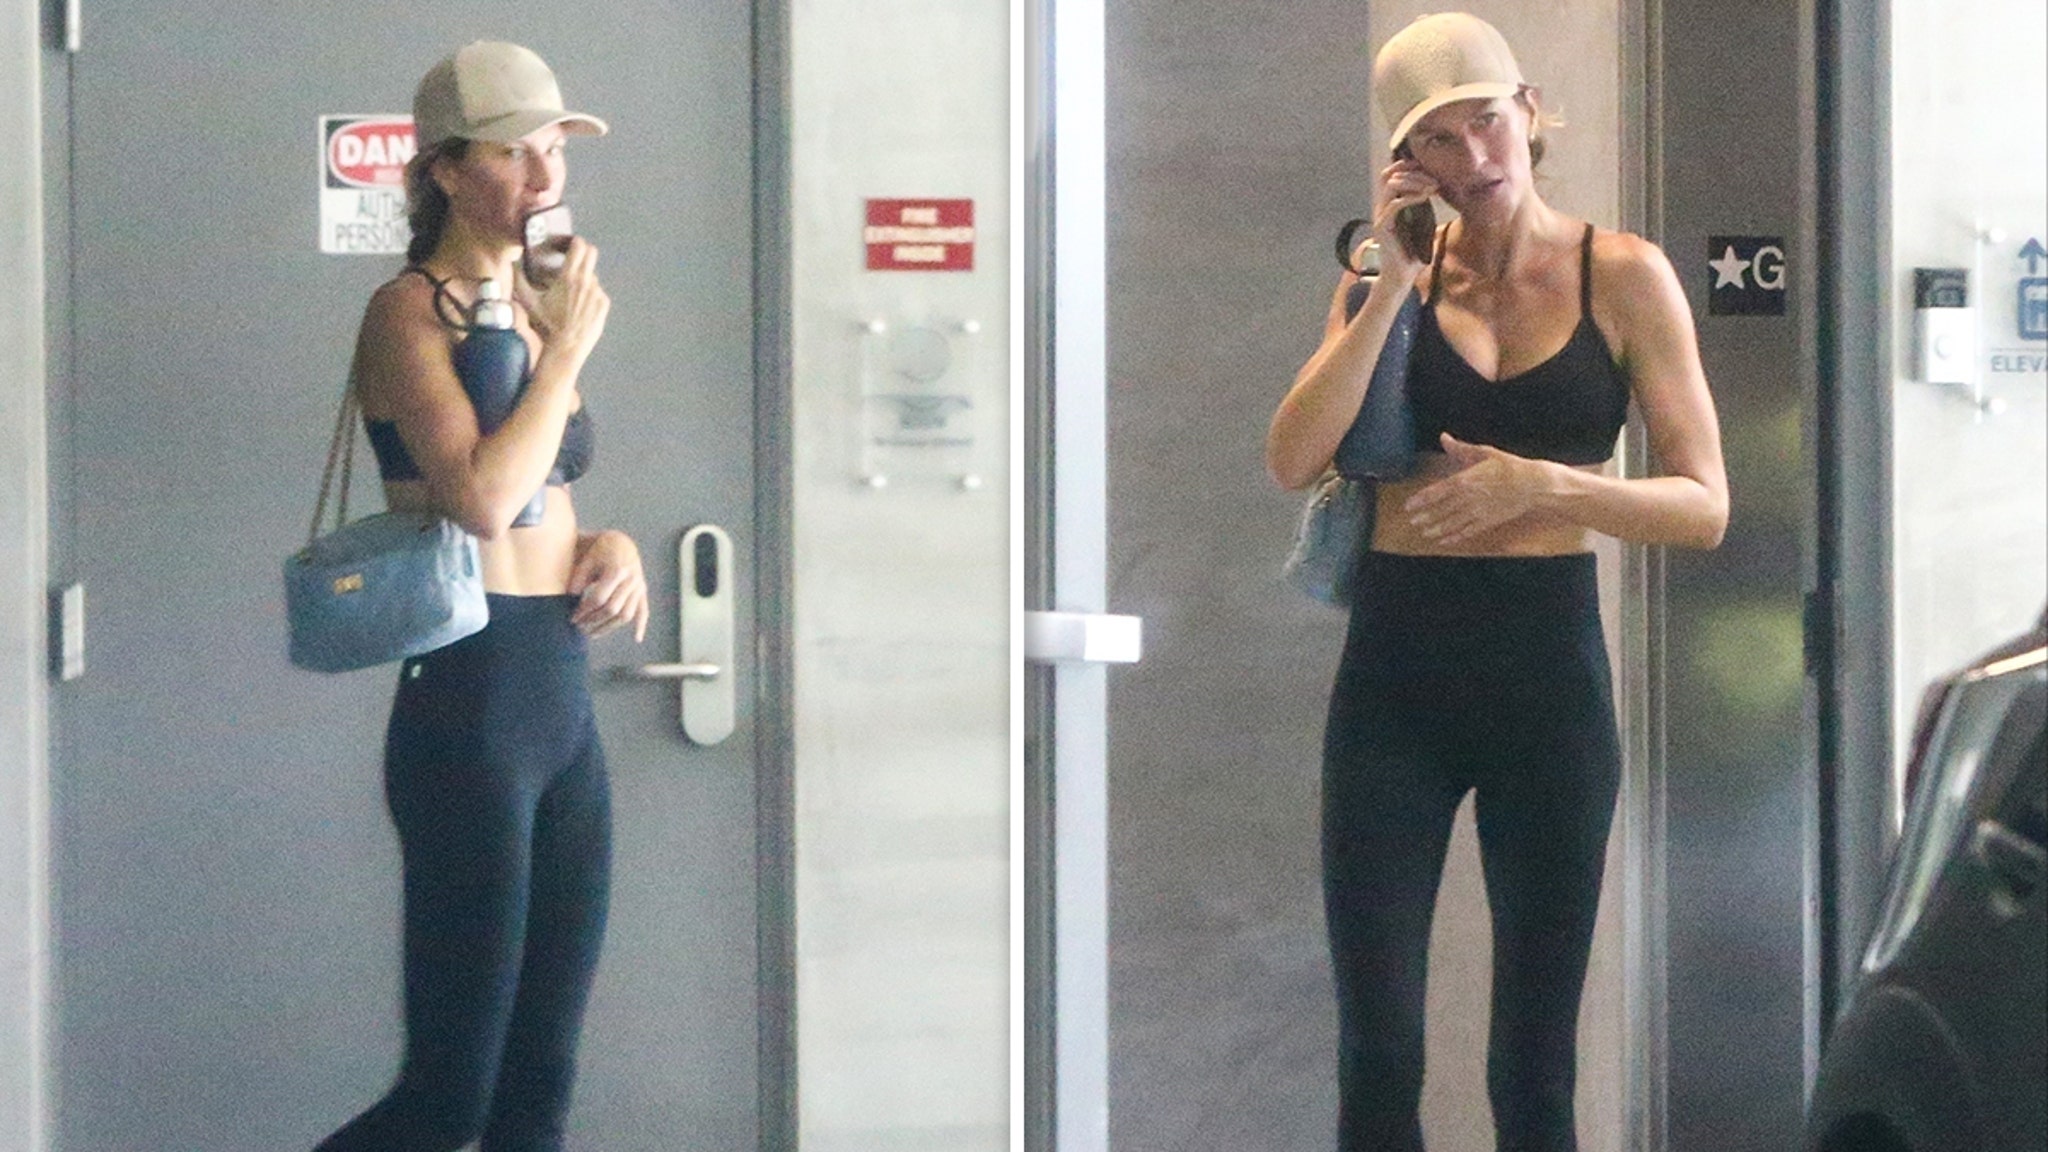 Gisele Bündchen hits the gym in Miami amid rumors of trouble with Tom Brady